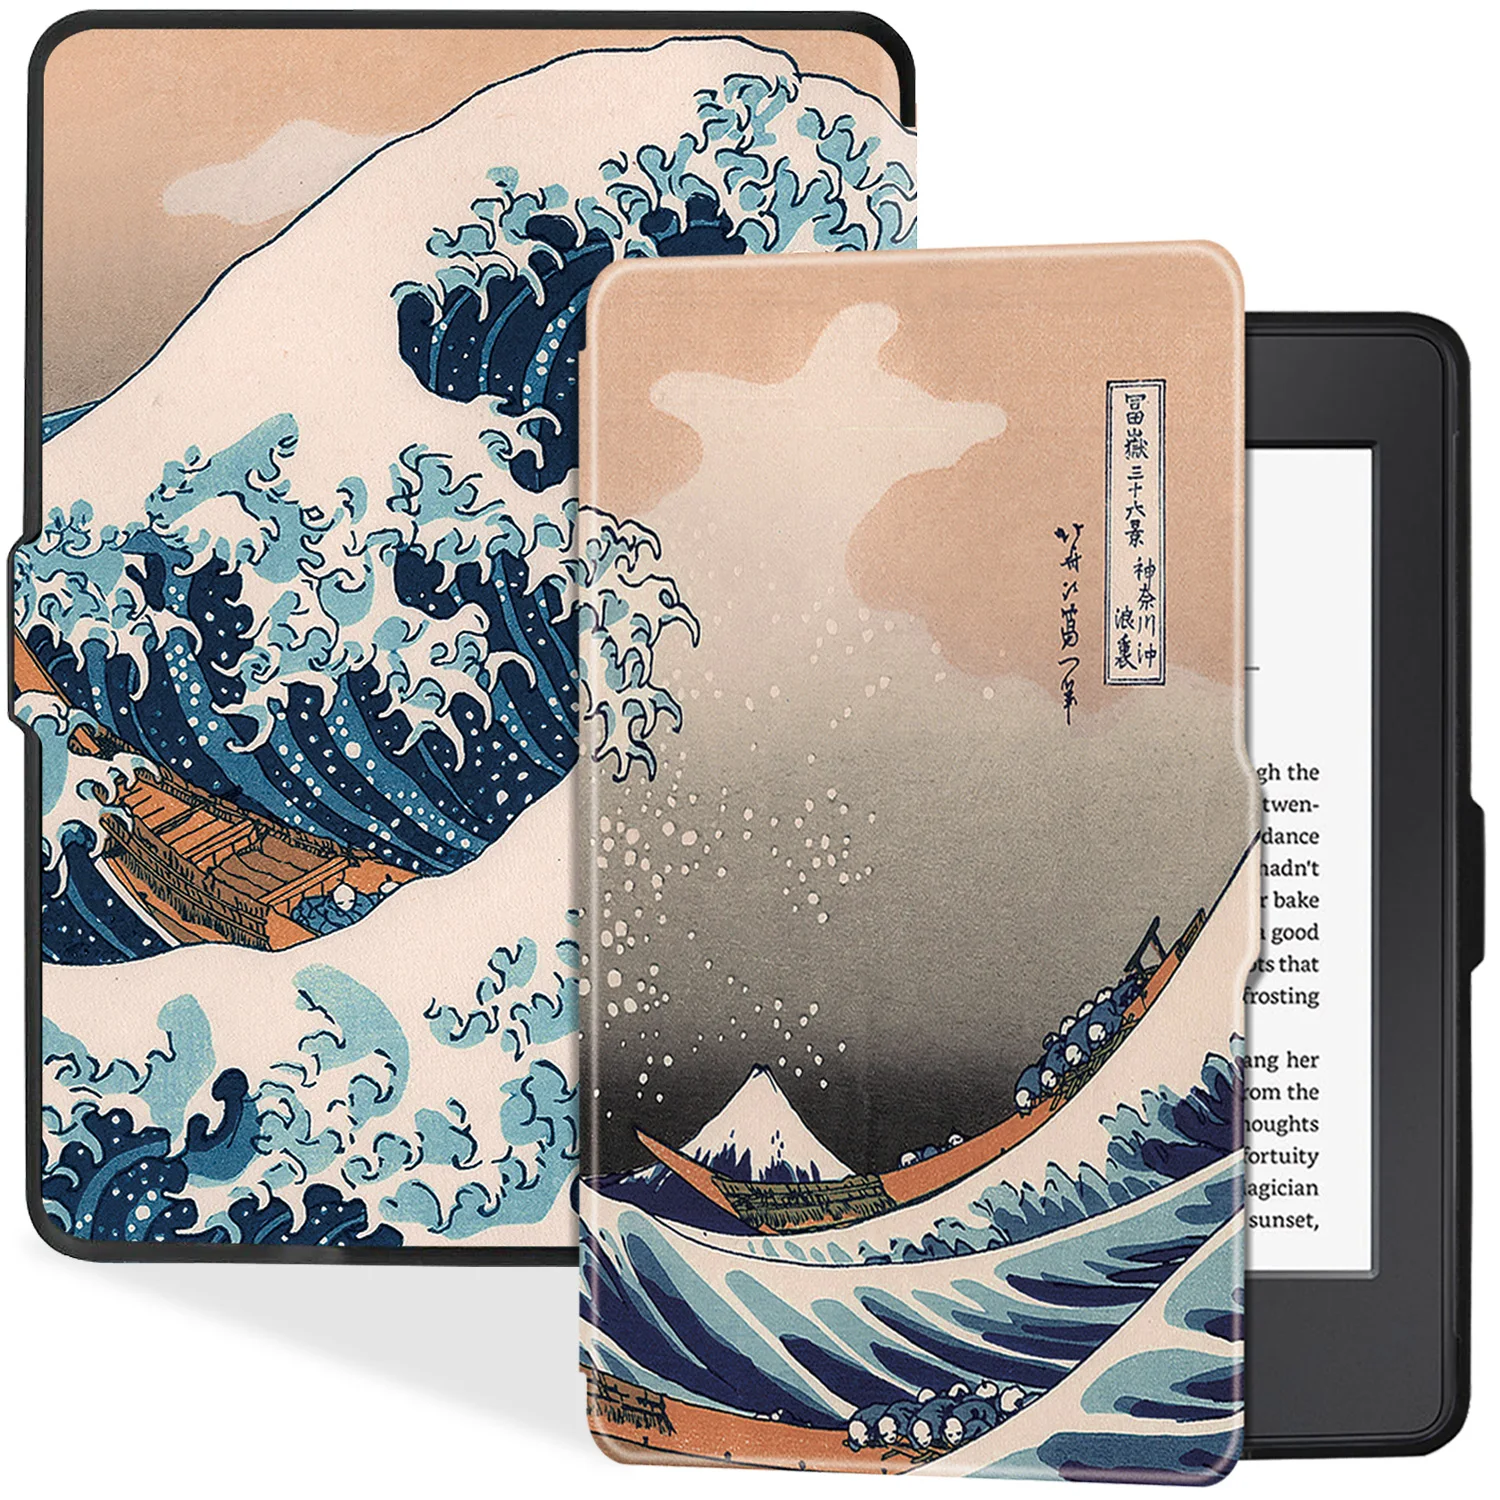 WALNEW Case for 6” Kindle Paperwhite 2012-2017(Model No.EY21 or DP75SDI) -  PU Leather Case Smart Protective Cover Only Fits Old Generation Kindle